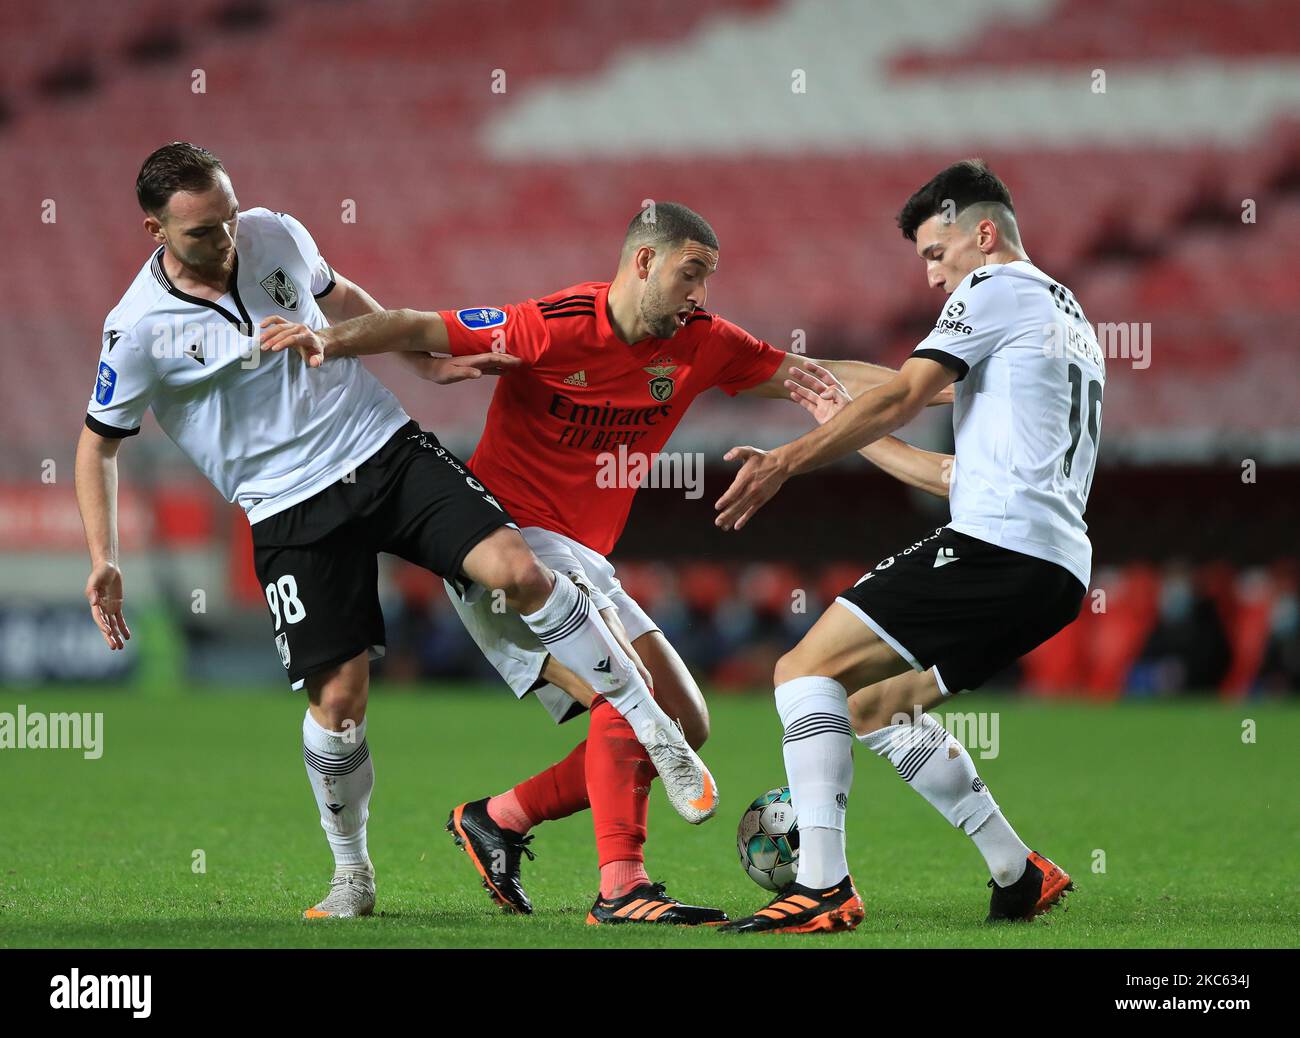 Adel Taarabt of SL Benfica with Nicolas Janvier and Pepelu of Vitoria SC in action during the Portuguese League Cup match between SL Benfica and Vitoria SC at Estadio da Luz on December 16, 2020 in Lisbon, Portugal.(Photo by Paulo Nascimento/NurPhoto) Stock Photo